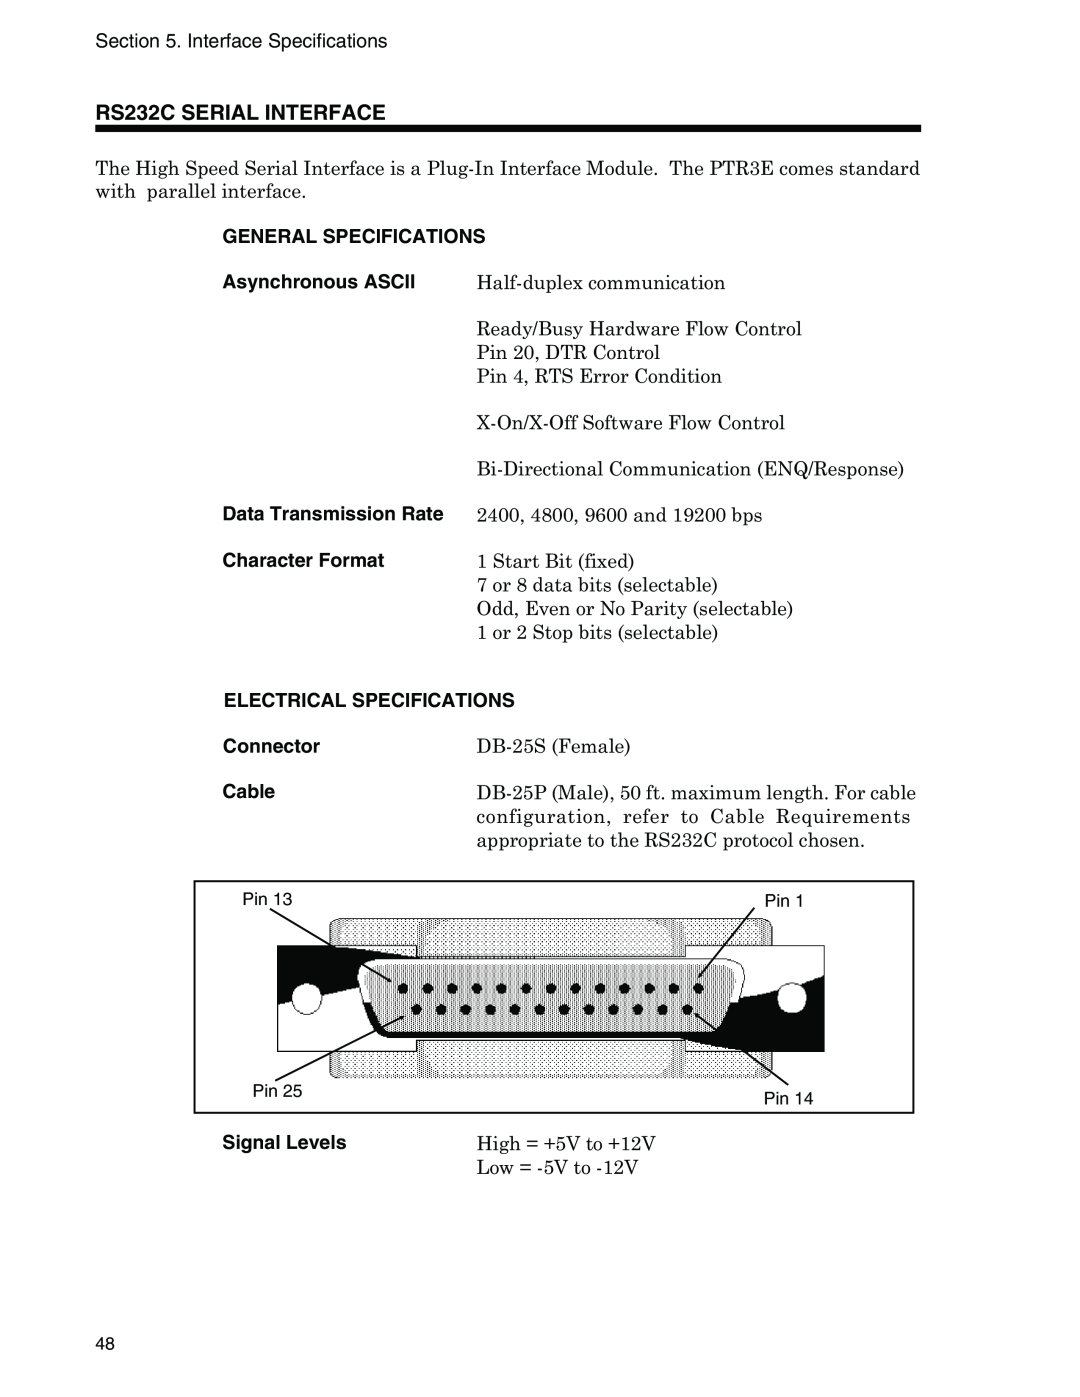 Panduit PTR3E manual RS232C SERIAL INTERFACE, General Specifications, Asynchronous ASCII, Data Transmission Rate, Connector 